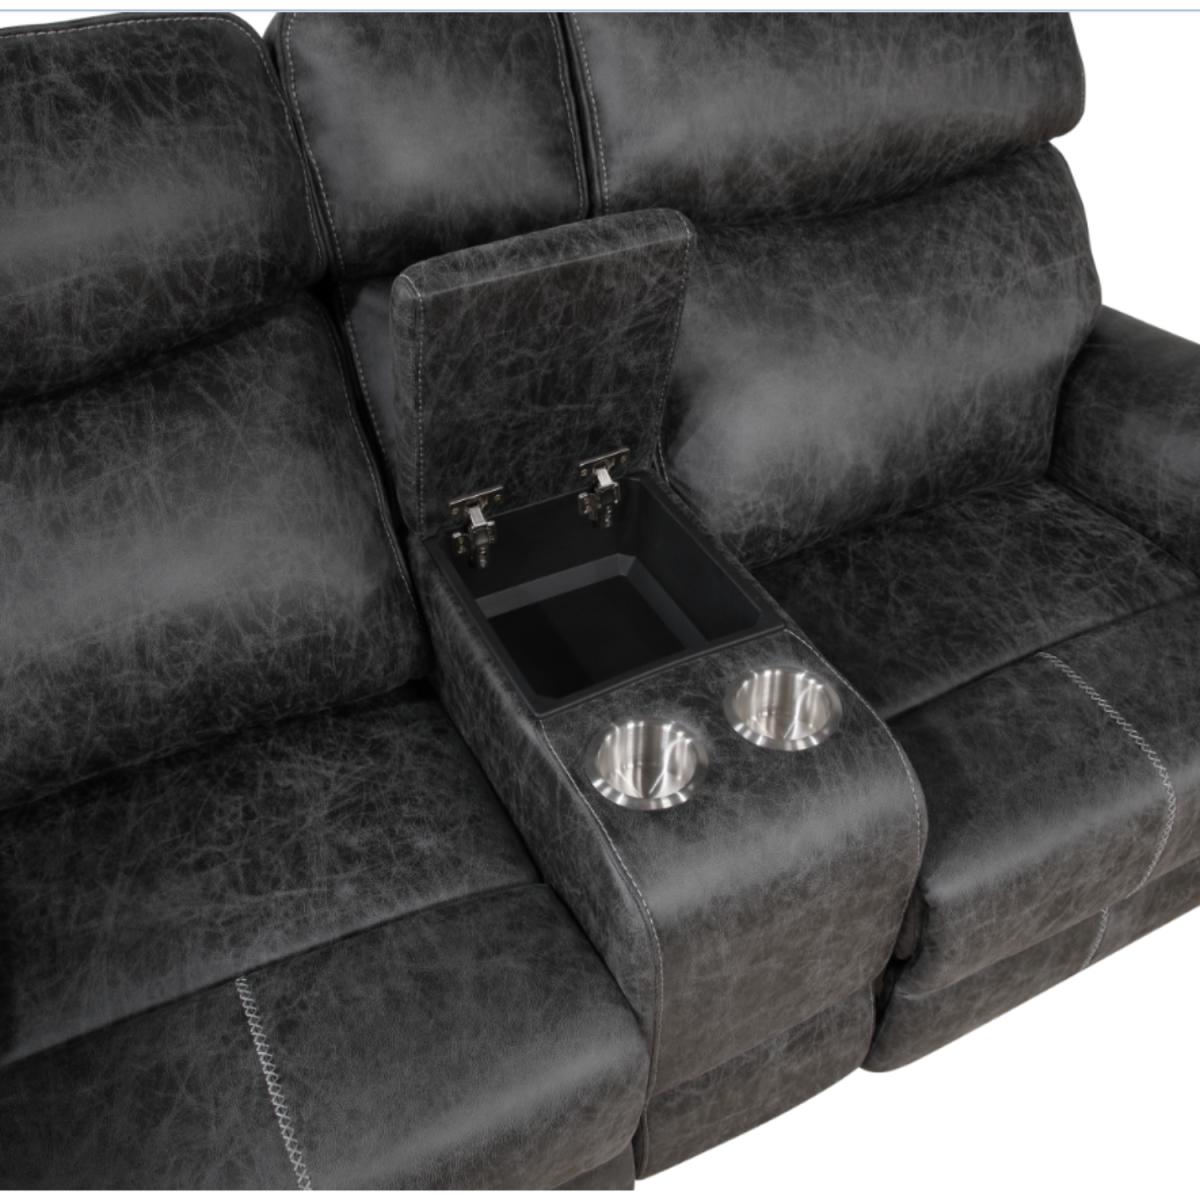 SILLON RECLINABLE 2 PERS. GRIS OSC.